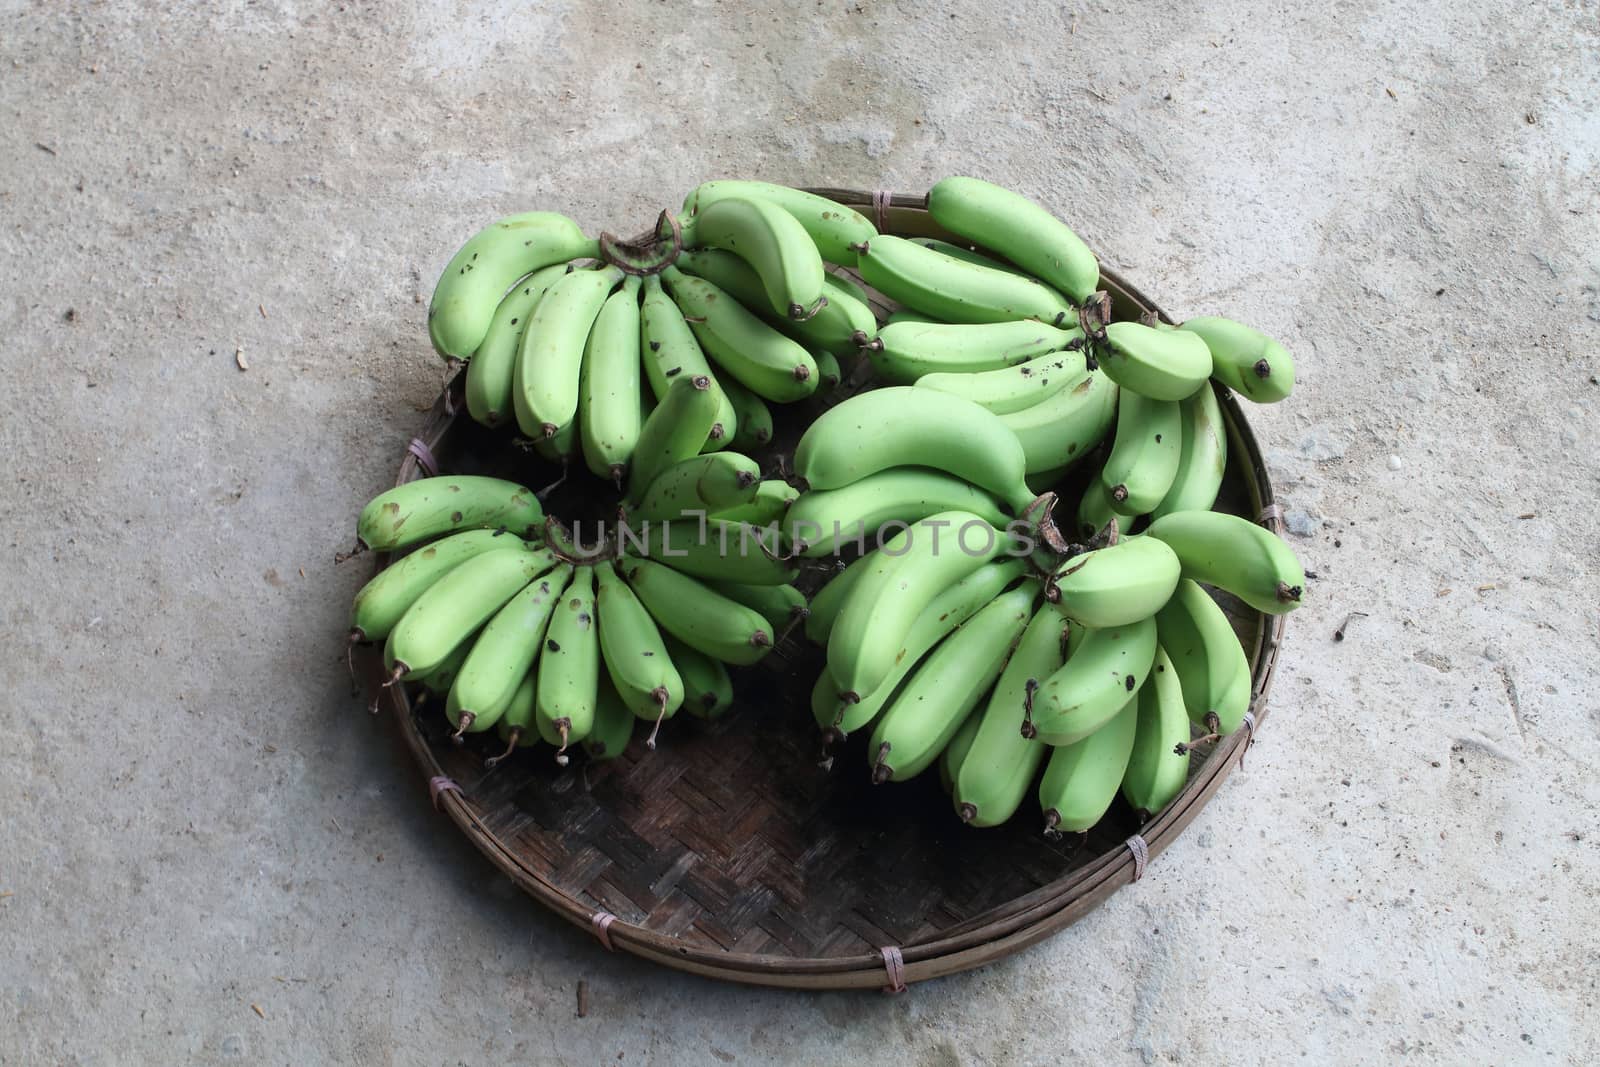 Four groups of unripe banana are in the pannier.